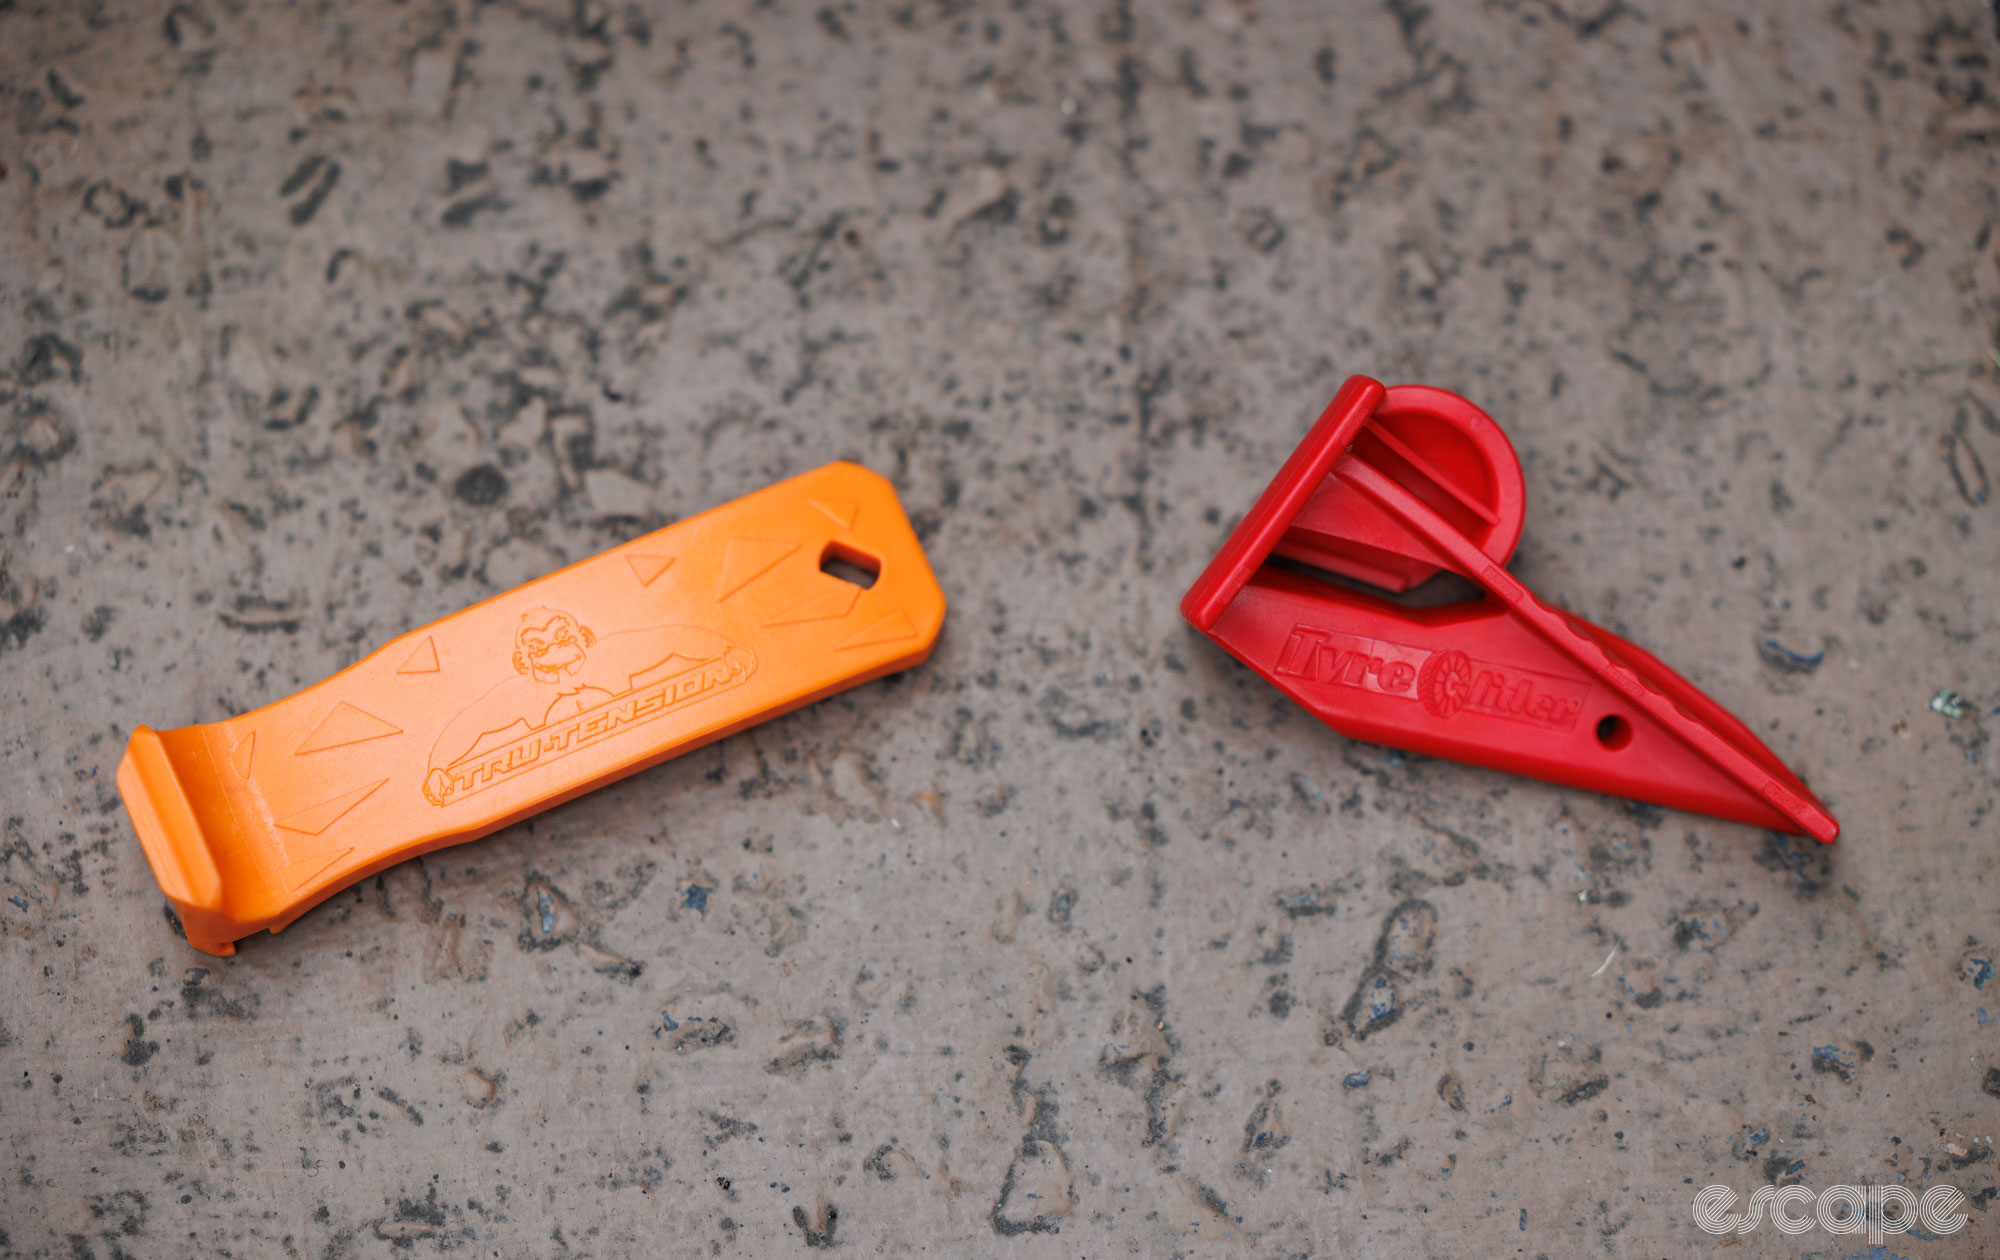 Review: Tyre Glider tyre lever